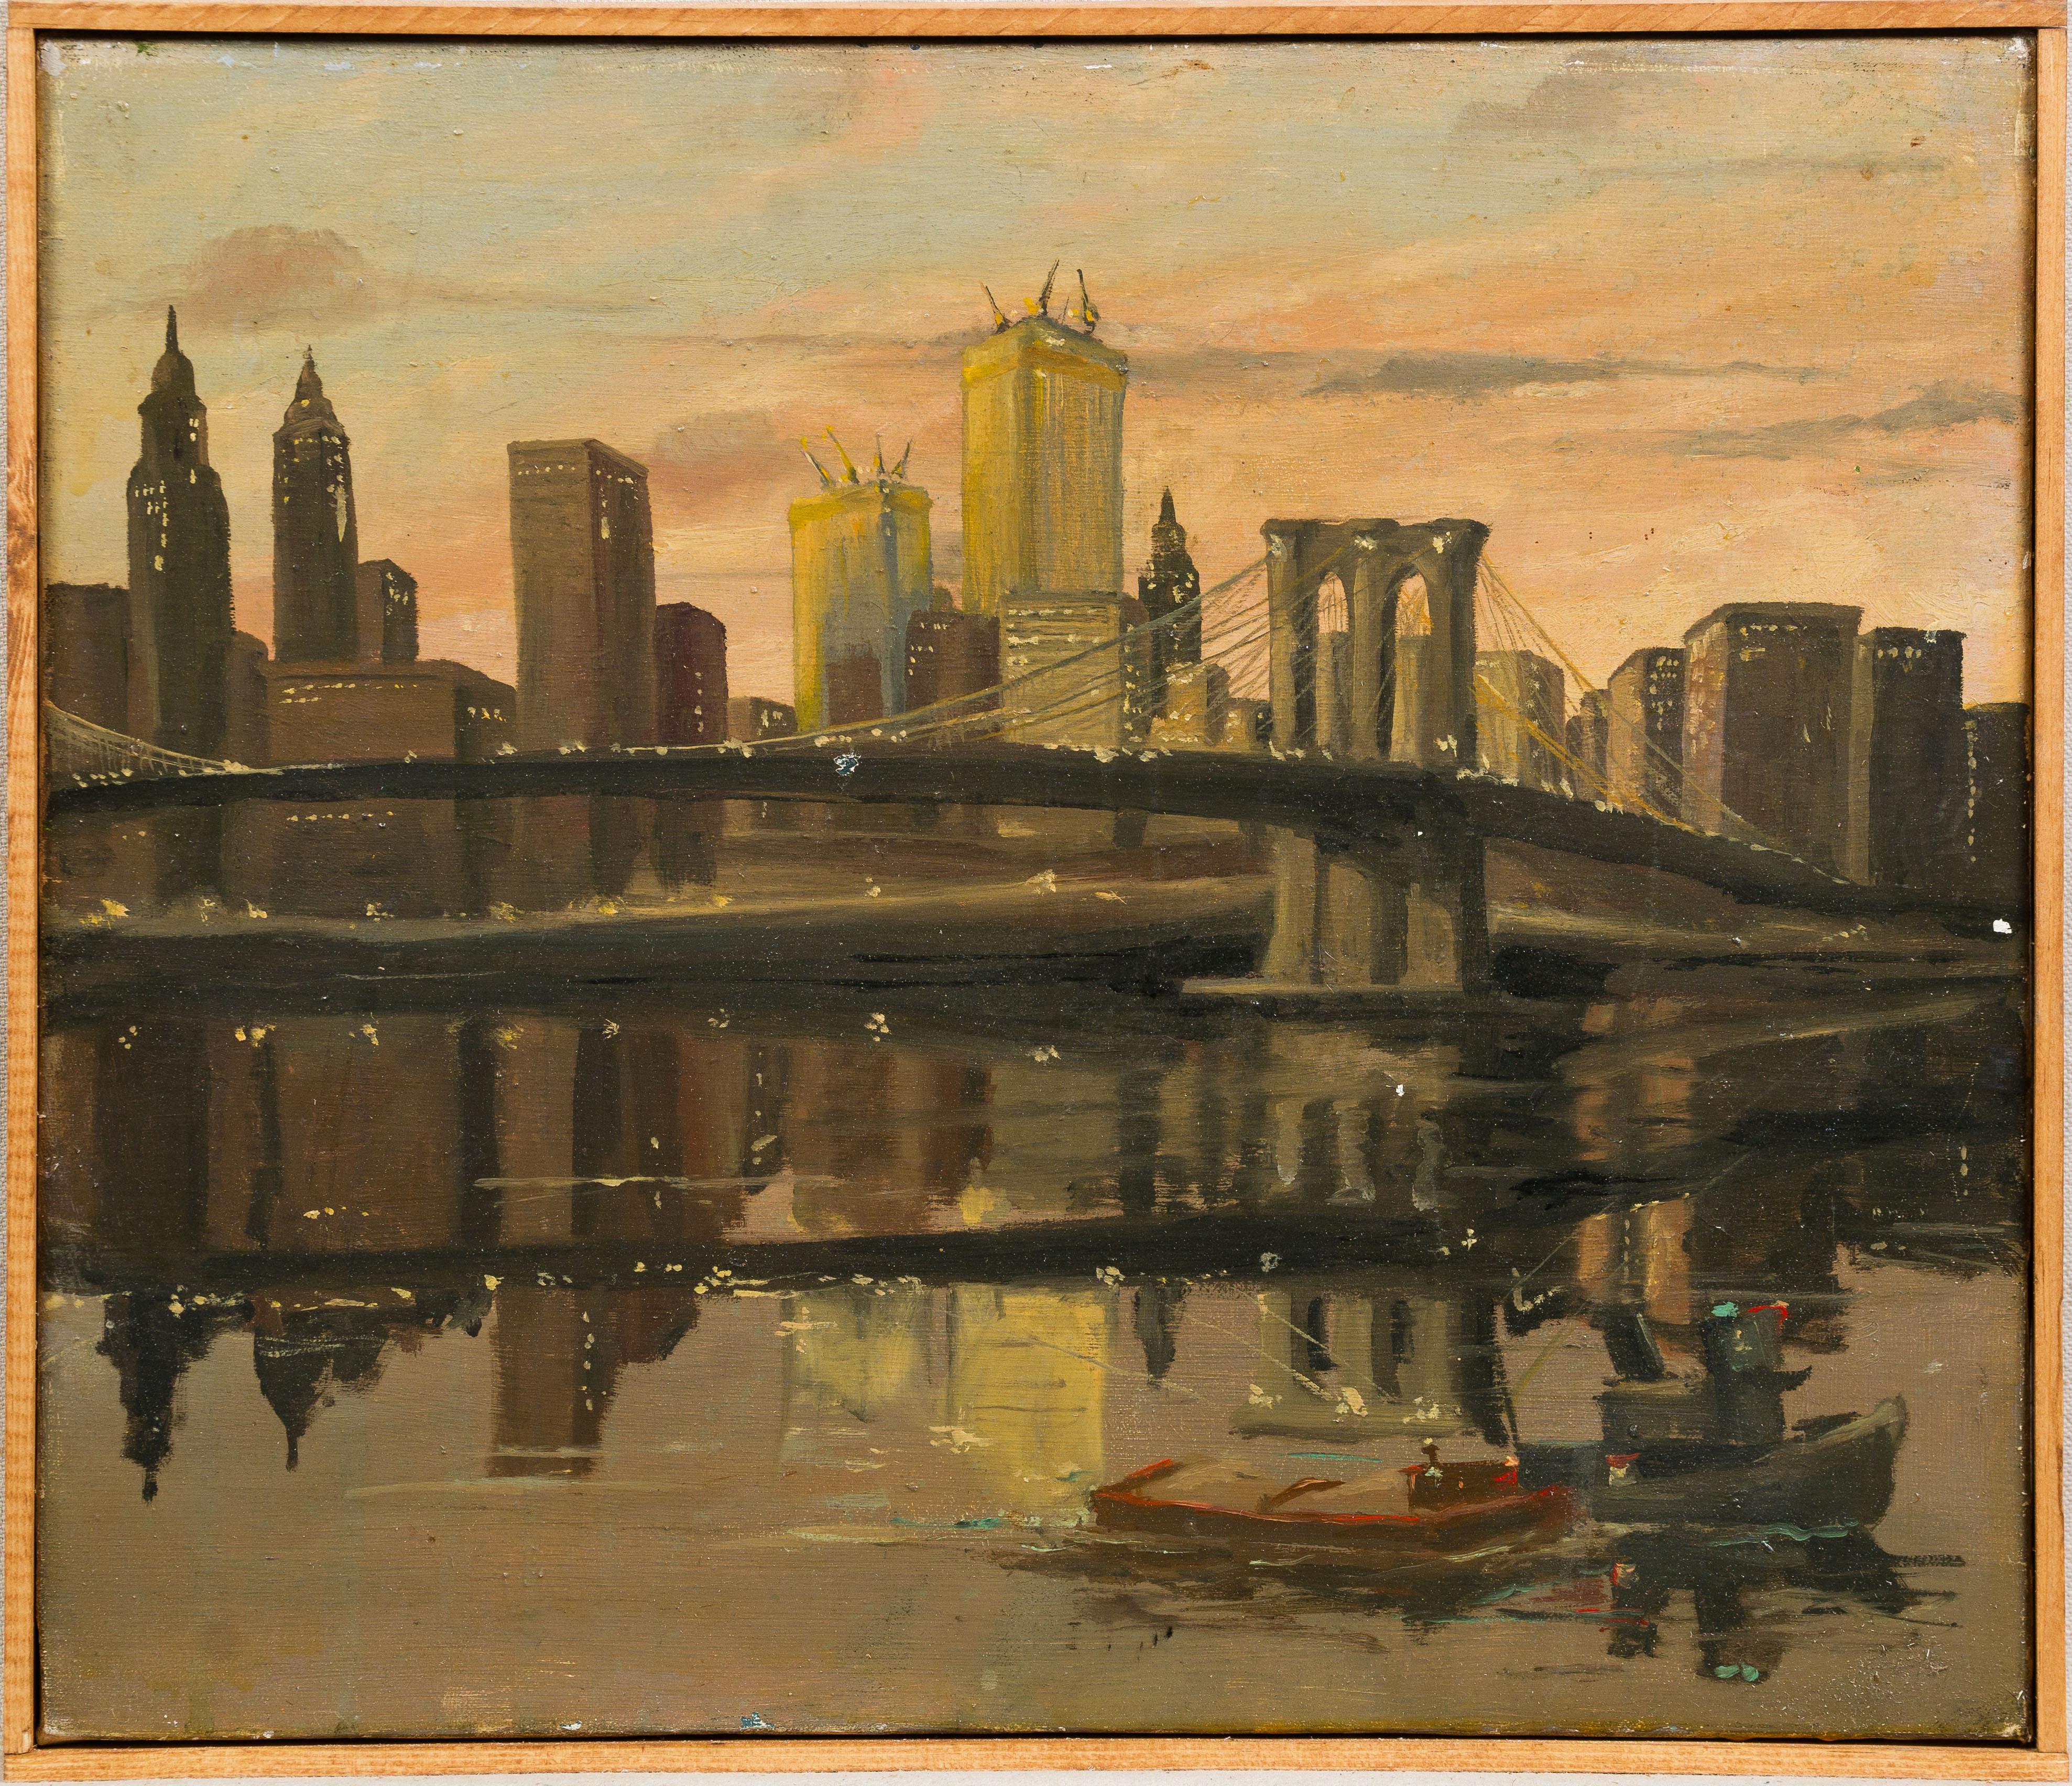 Unknown Abstract Painting - Vintage New York Modernist Cityscape Brooklyn Bridge Dusk Original Oil Painting